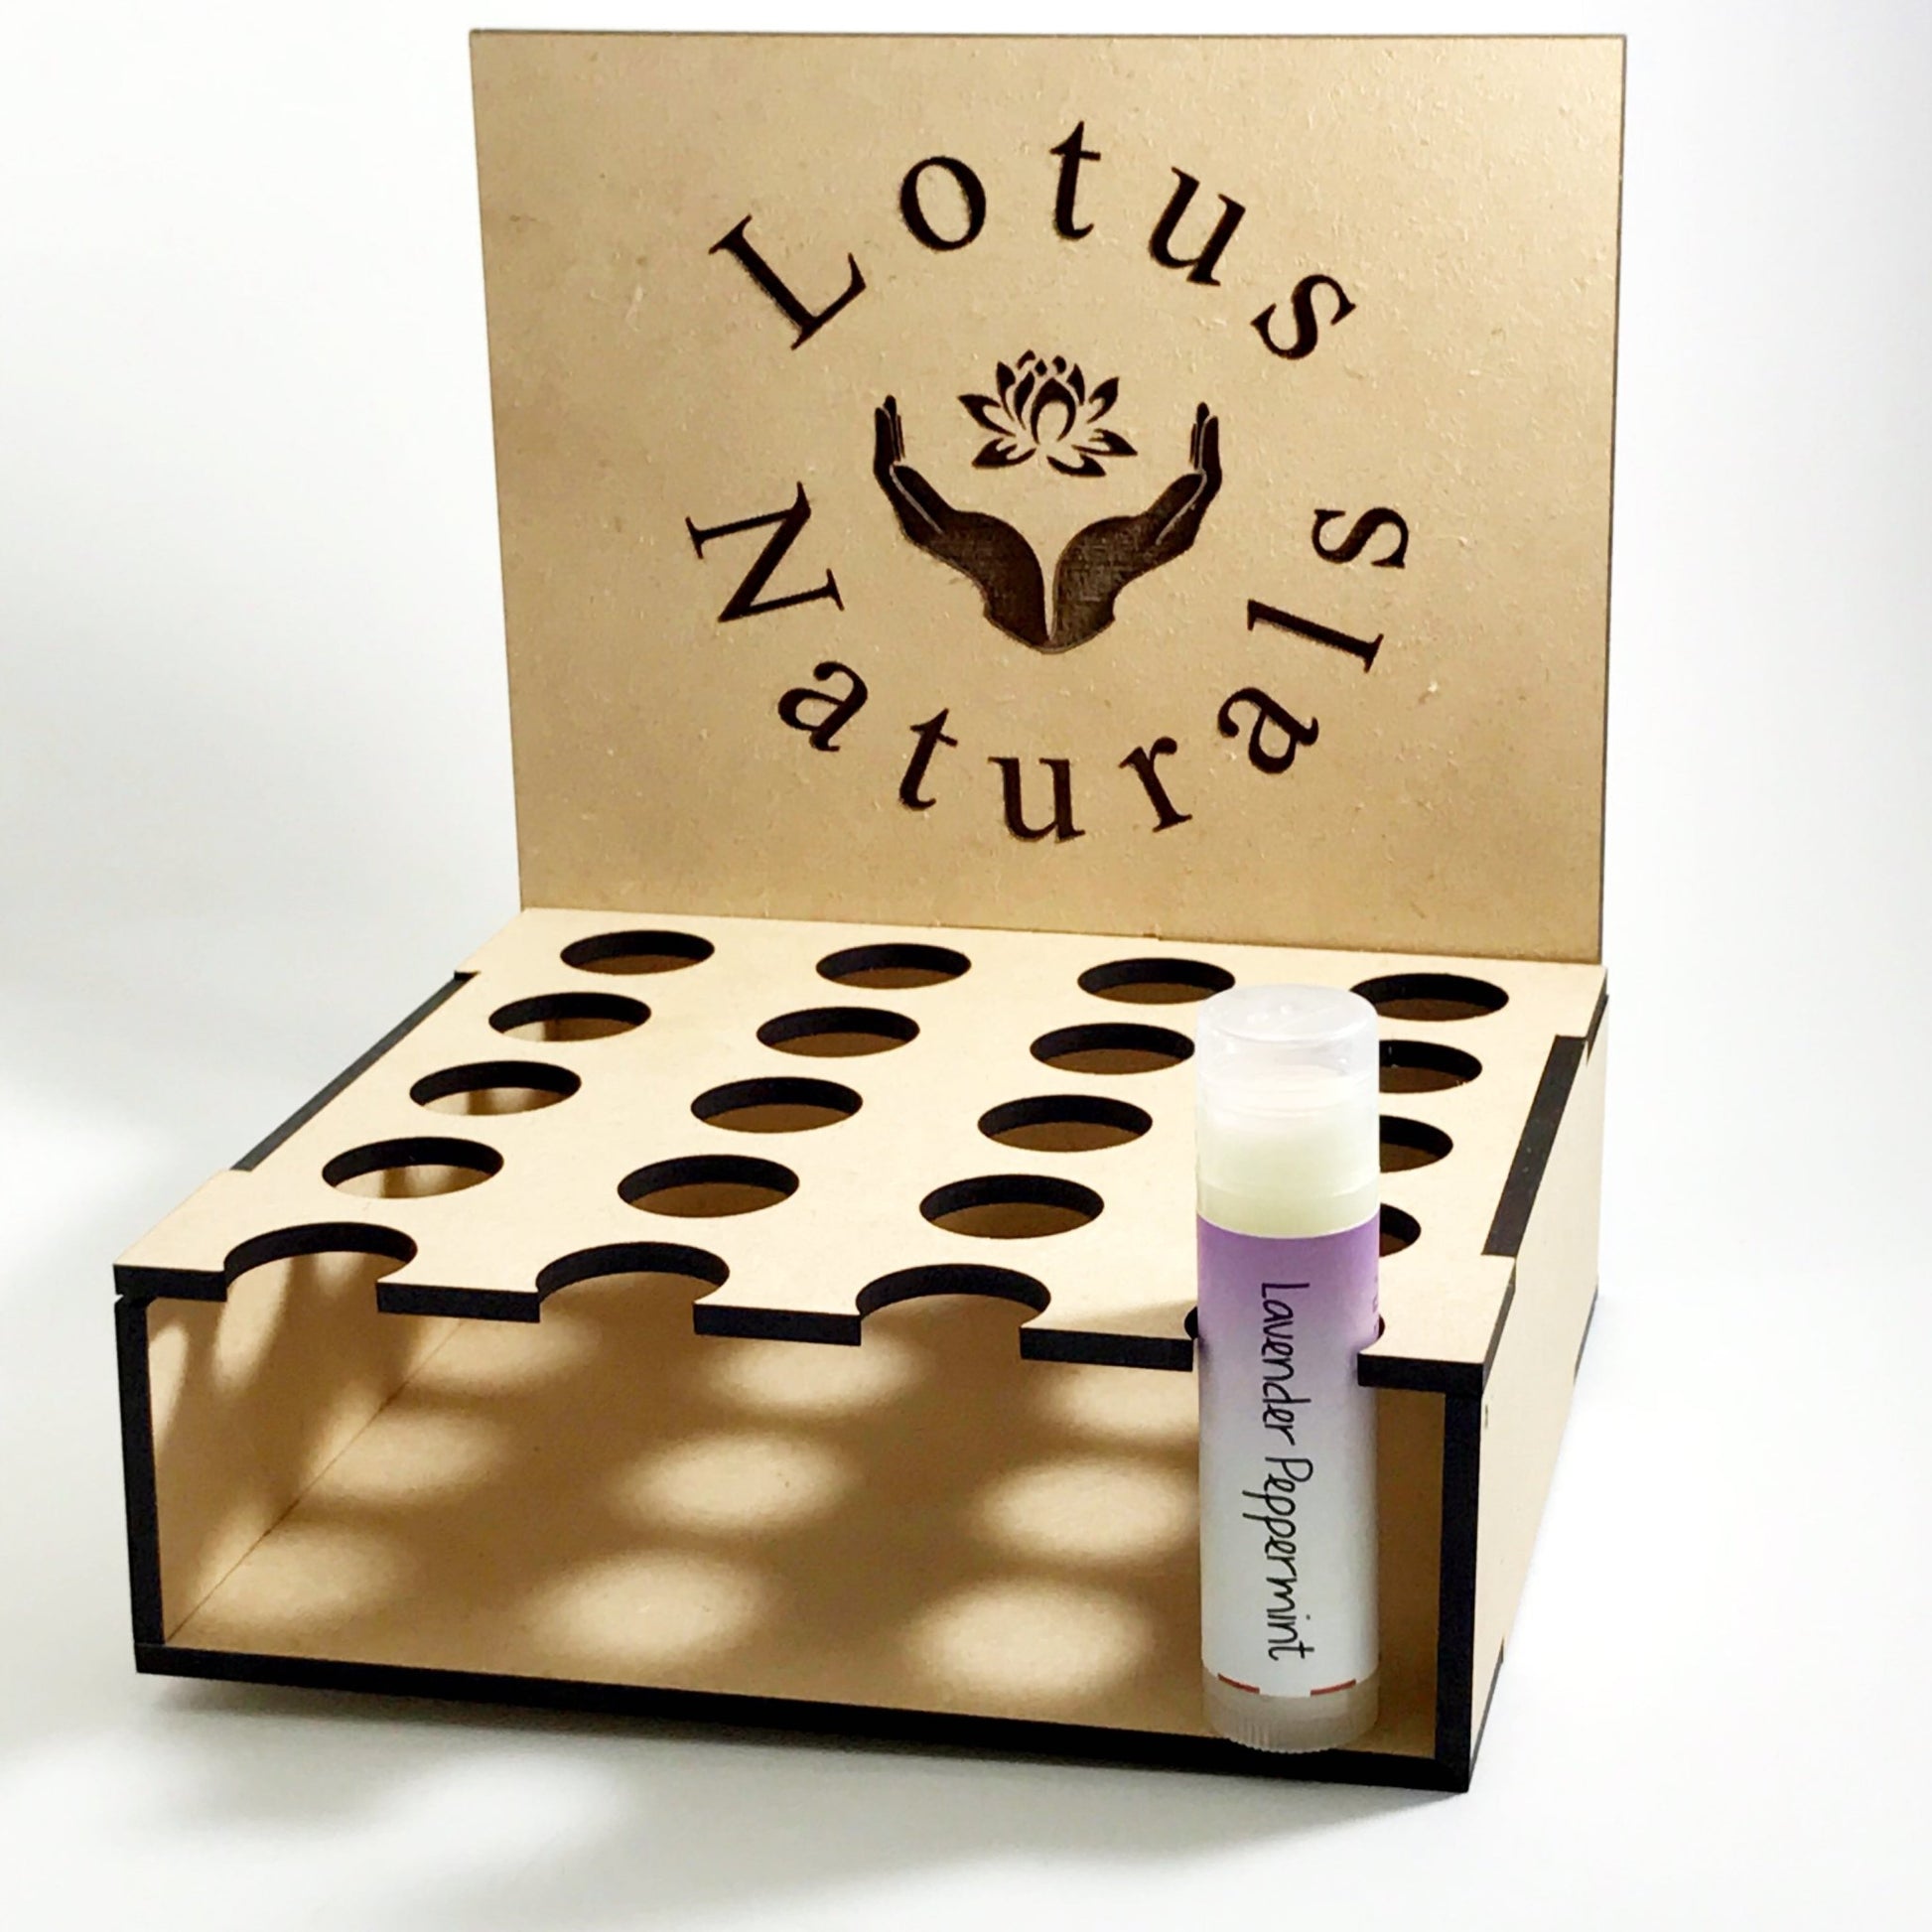 Custom Lip Balm Display Boxes - 20 Lip Balms - Lotus Naturals with one balm in display by LeeMo Designs in Bend, Oregon